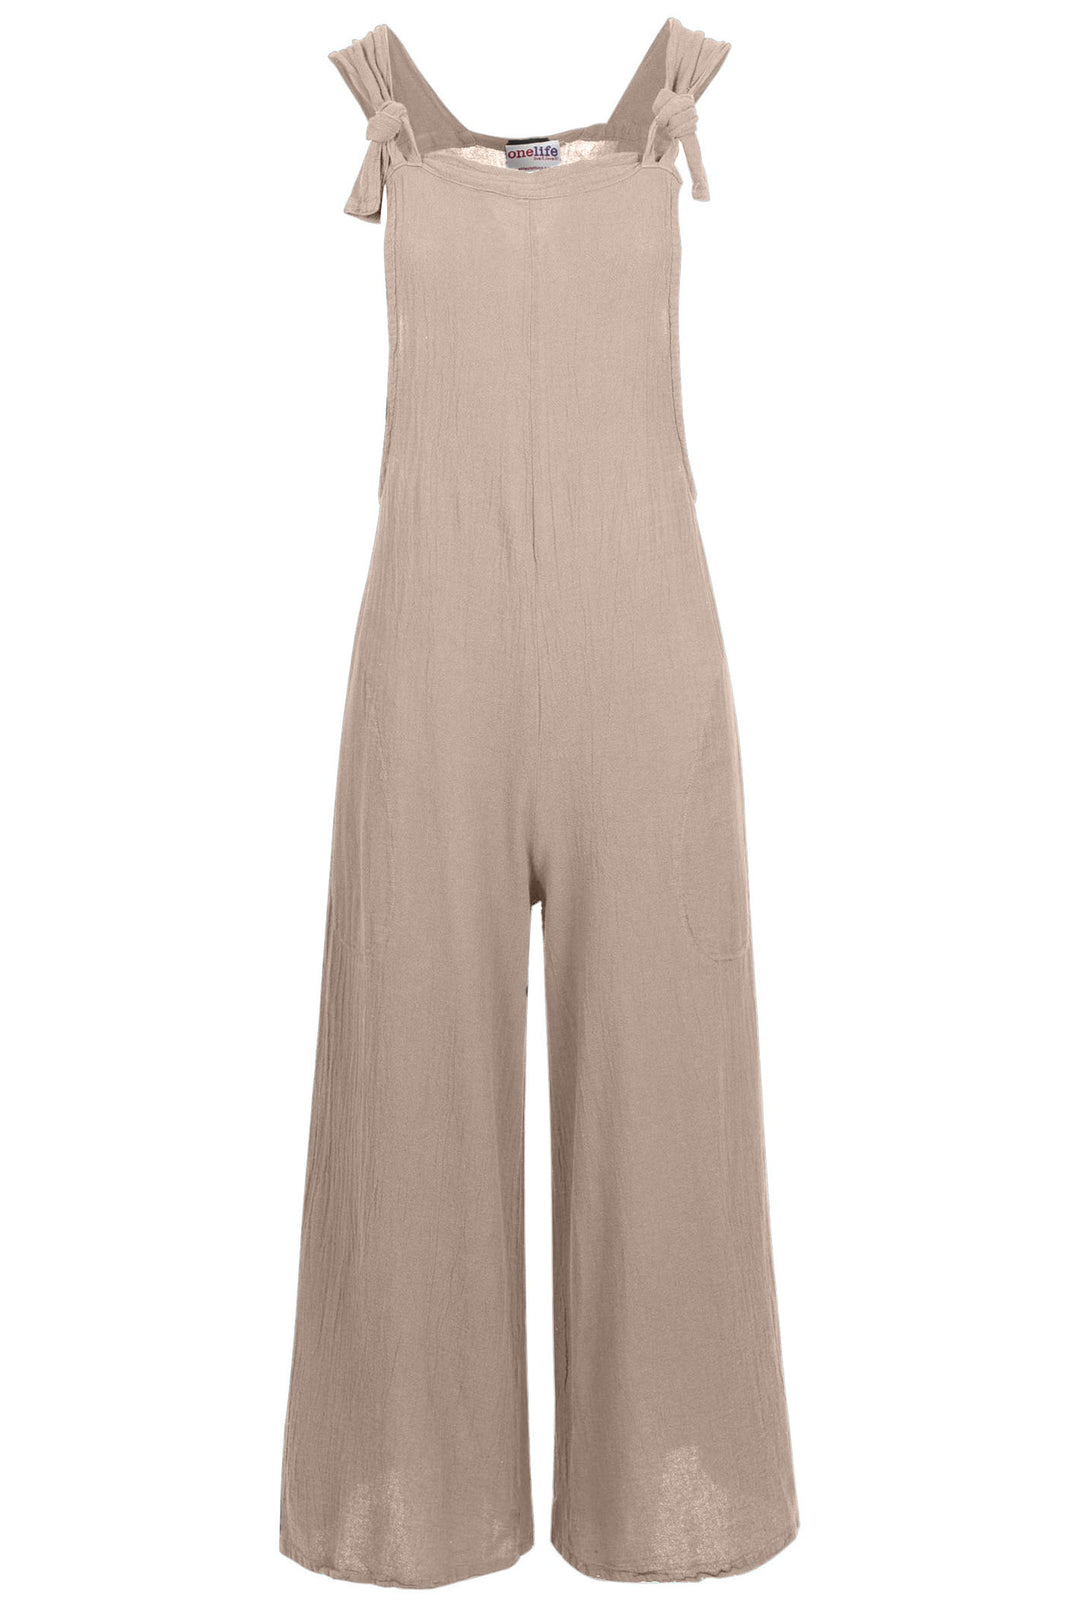 Onelife D606 Sabina Taupe Cotton Jumpsuit